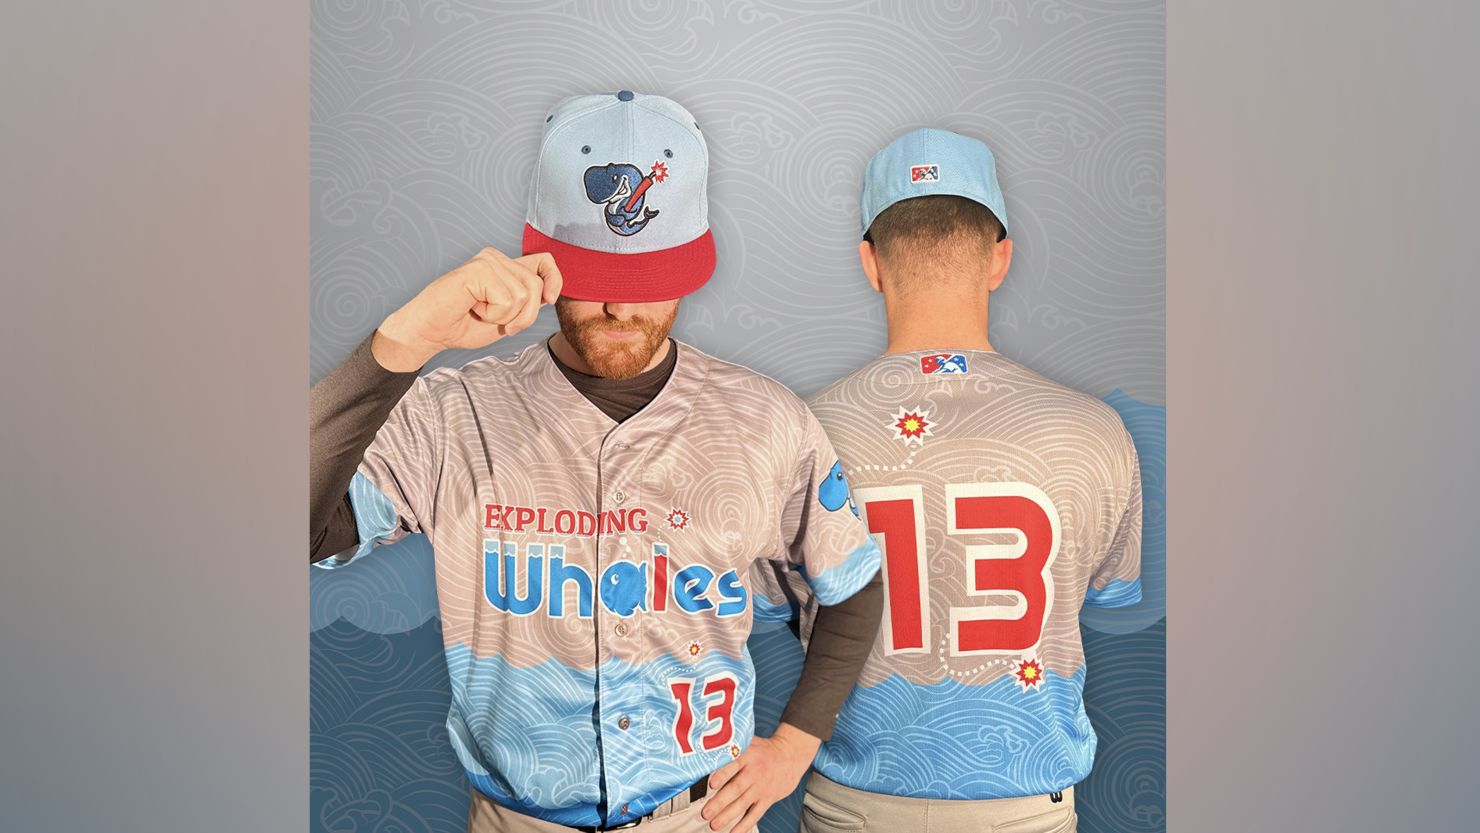 The Eugene Emeralds have released jerseys with their latest "alternate identity."